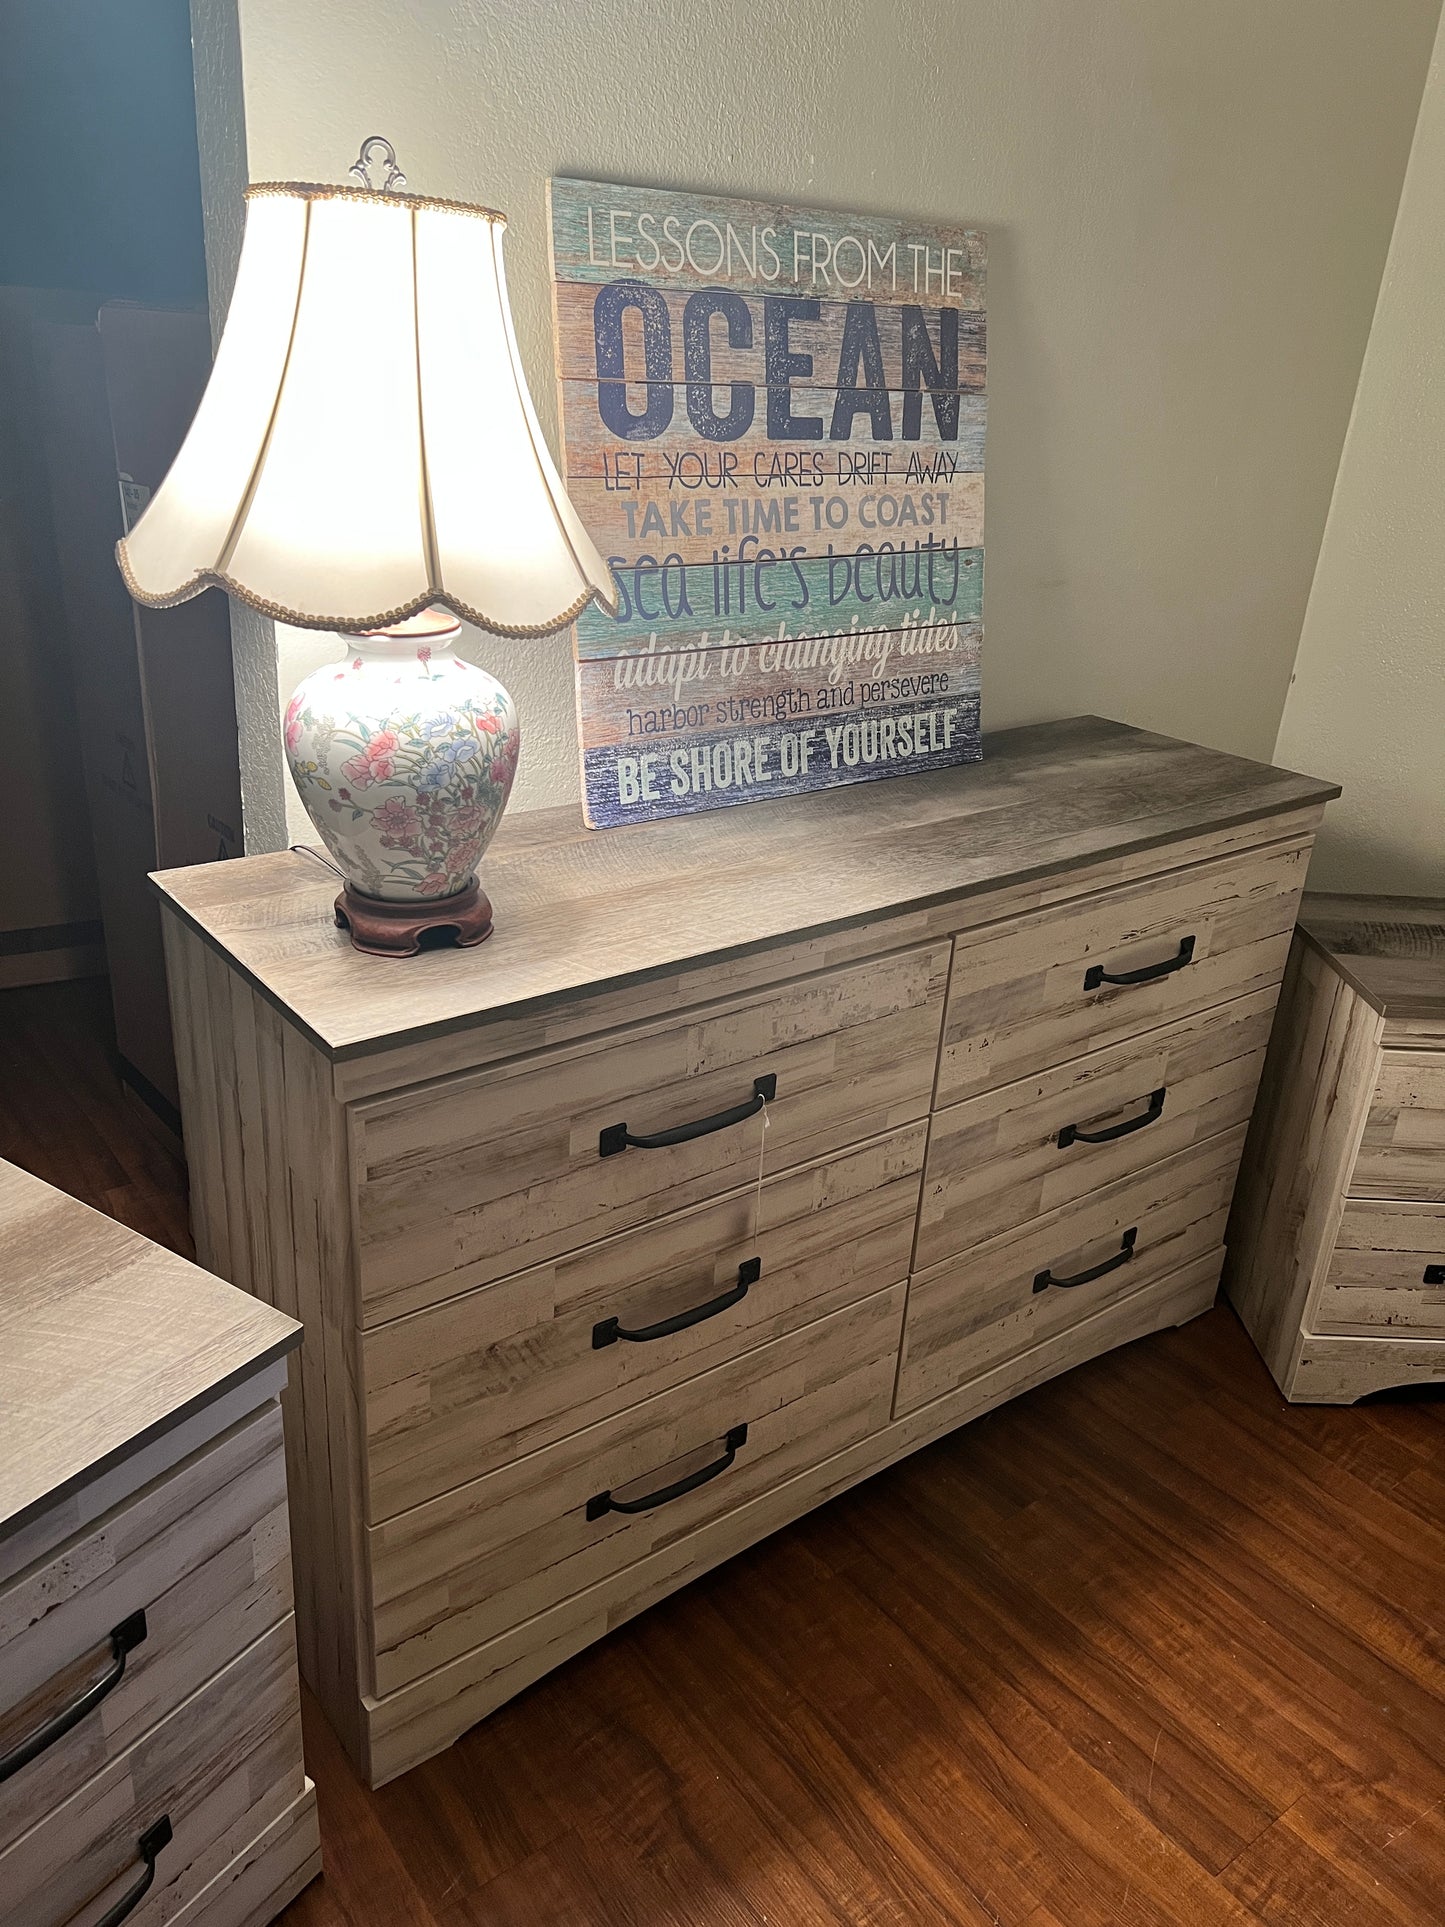 Brand new Aspen Bedroom set:  Low boy 6 drawer dresser and two matching night stands